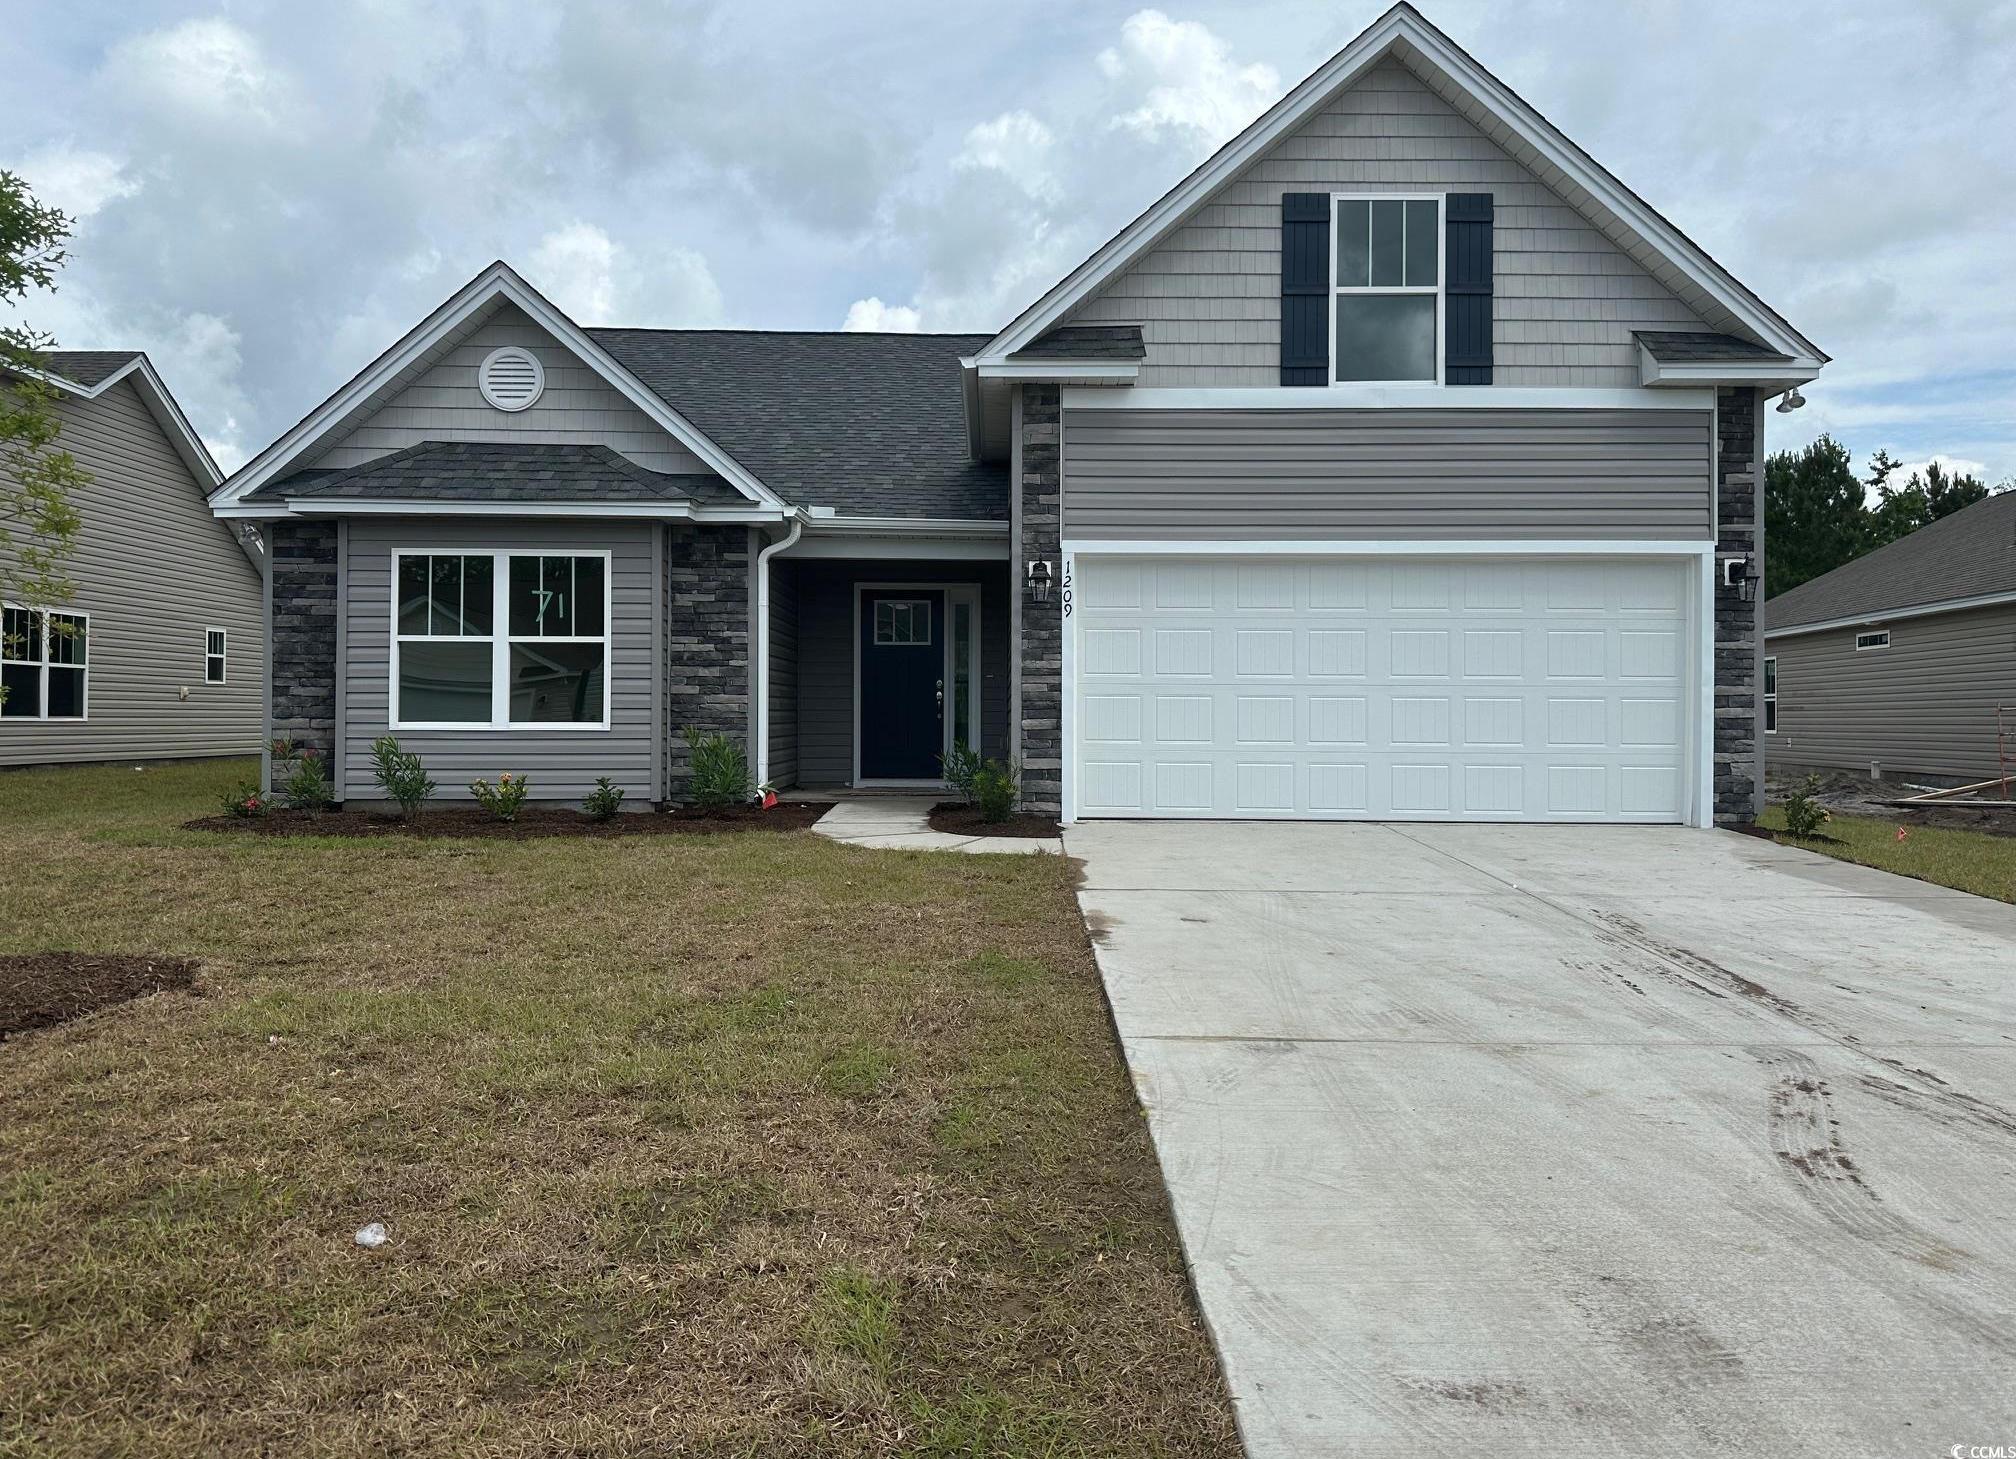 Photo one of 1209 Wehler Ct. Conway SC 29526 | MLS 2401099